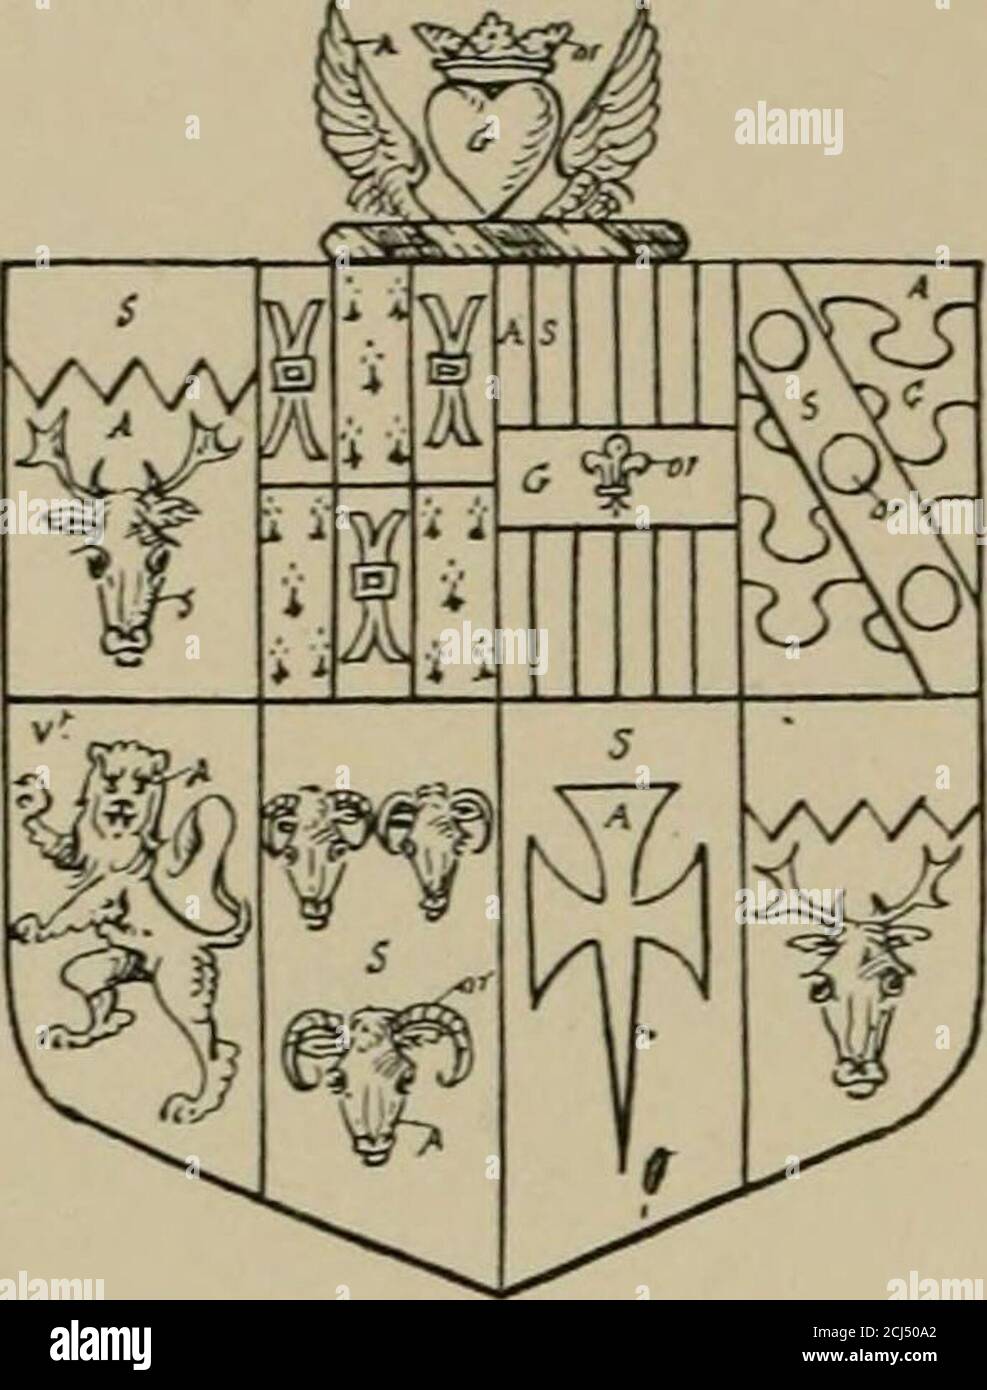 . The visitations of the county of Sussex made and taken in the years 1530, Thomas Benolte, Clarenceux king of arms; and 1633-4 by John Philipot, Somerset herald, and George Owen, York herald, for Sir John Burroughs, Garter, and Sir Richard St. George, Clarenceux . John Adye of Dod-=pEliz: da. of Thomas Waller ofdington in Com. Gregories neere Beckensfeild inKent. Com. Bucks. Edward Adye of Barham^Leah,da. of Peter Fortrye ofin Com: Kent, Ar: 1663. Eastcombe in Com: Kent. James s. & h. 2. Mary. 5. Elizabeth,ffit. TAnoiees. â â â 3. Anne. 6. Susanna. 1. Leah. â â 4. Rosamond. 7. Dorothy. EDWARD Stock Photo